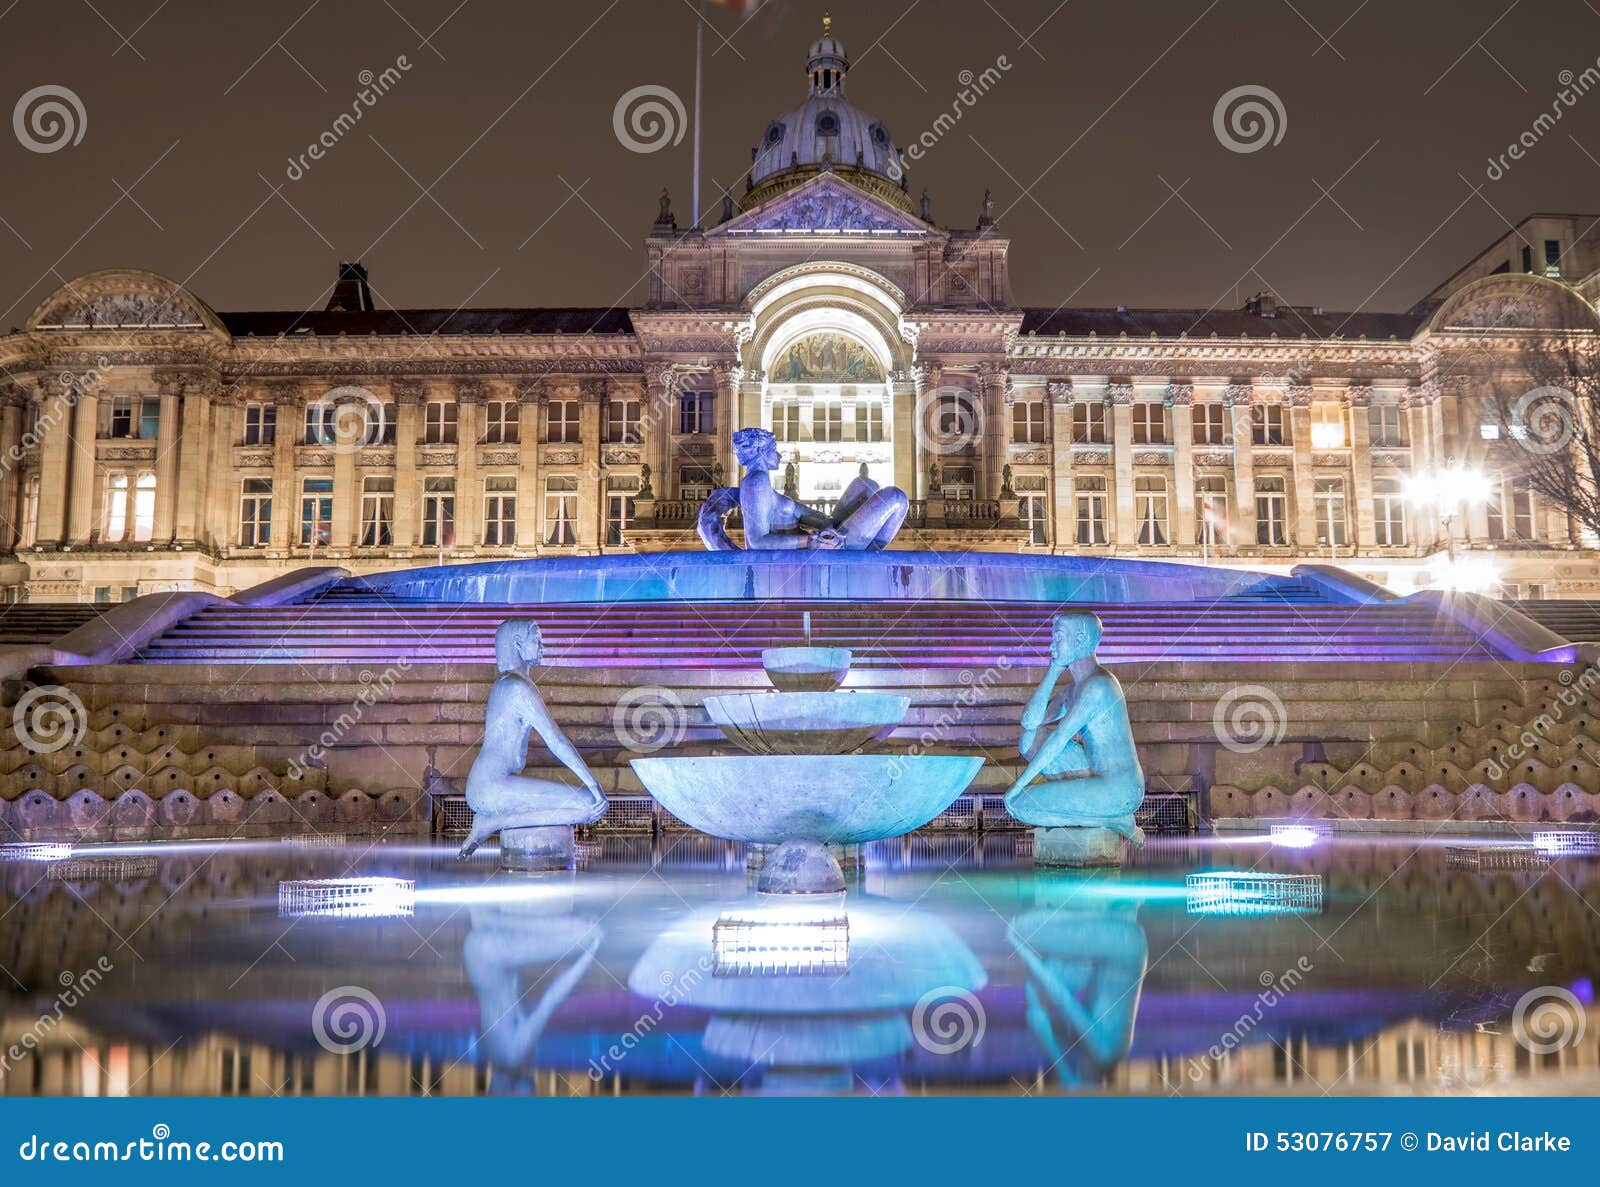 birmingham town hall and water fountain at night